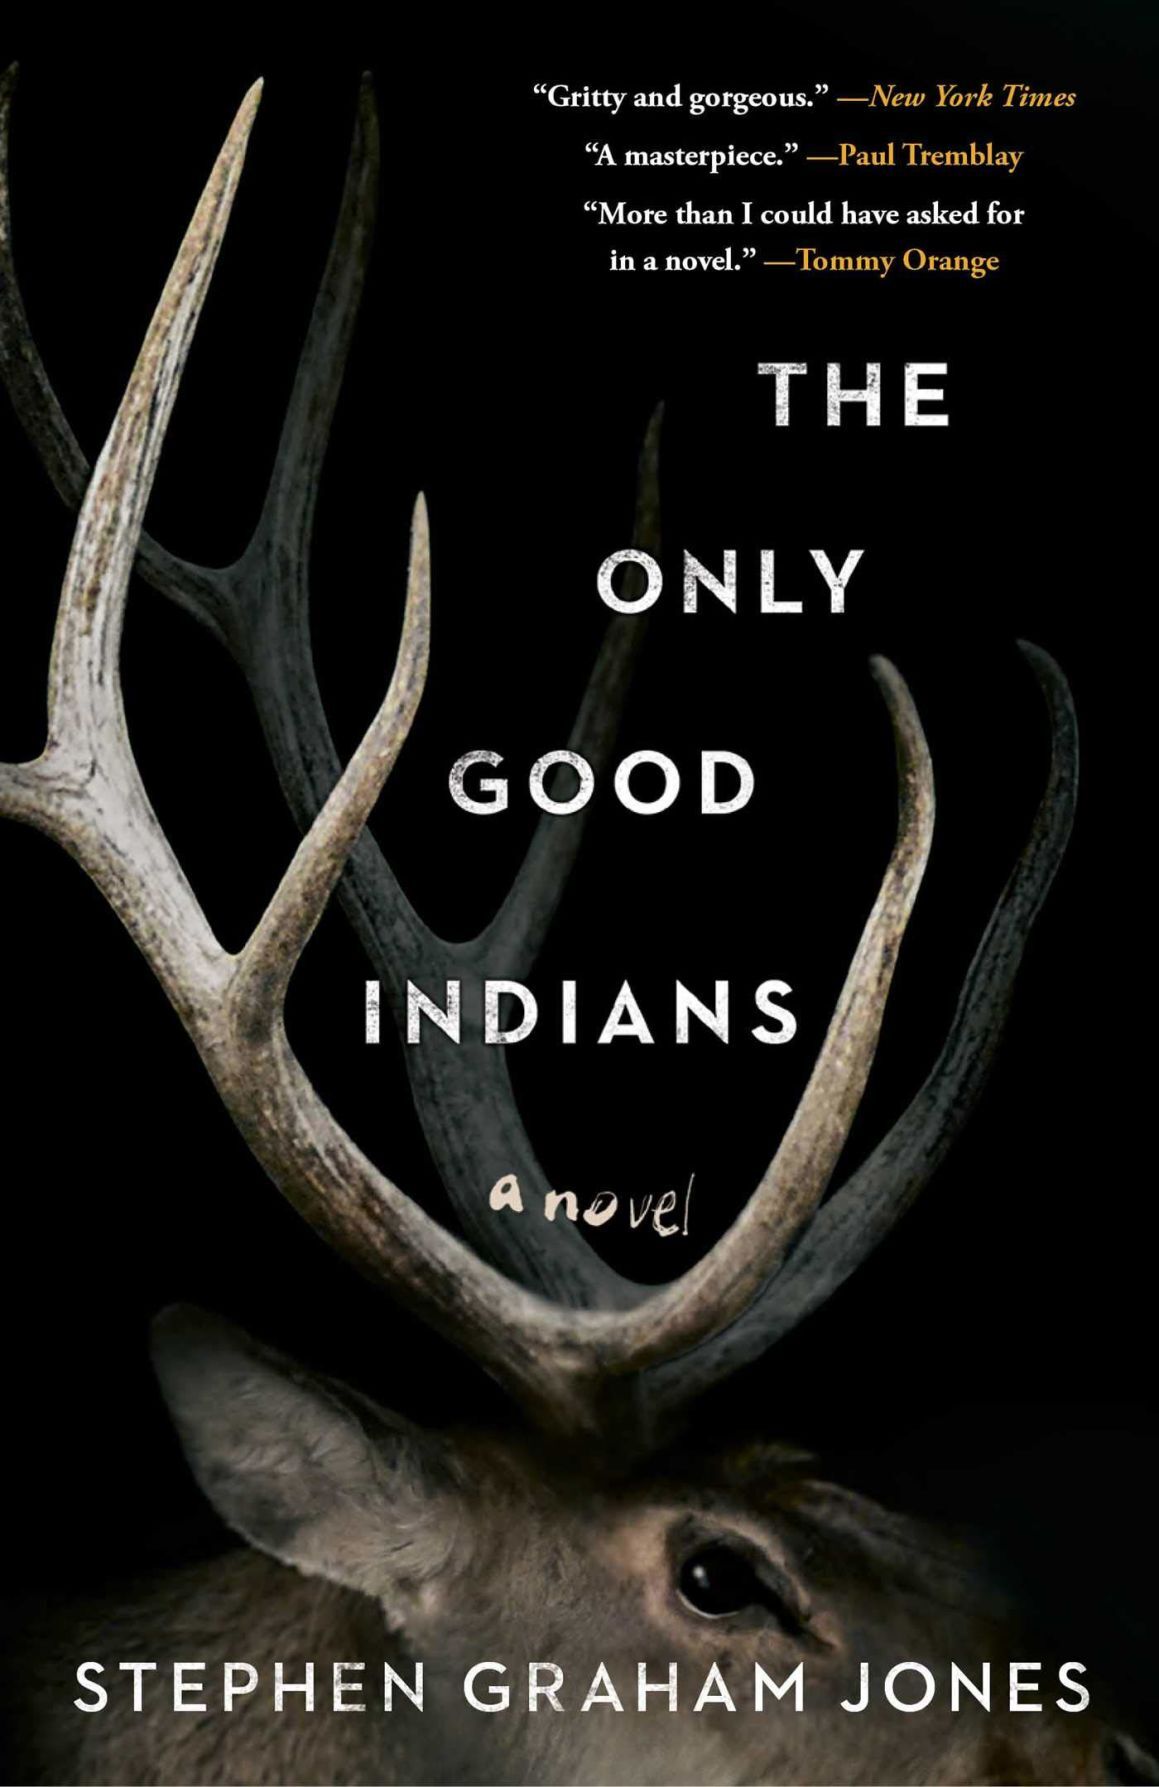 the only good indians review